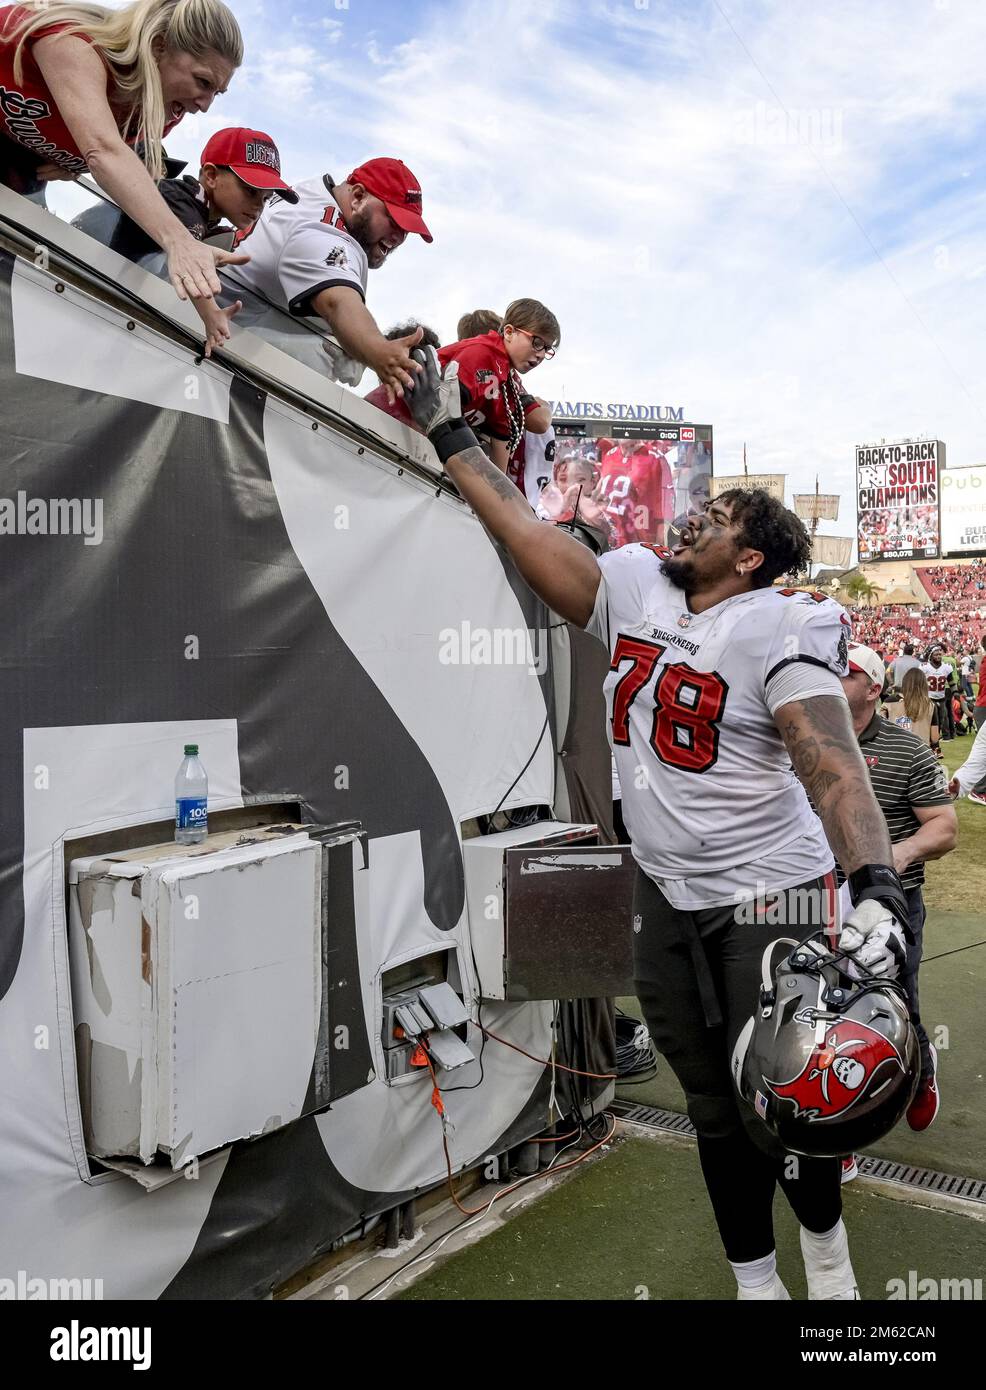 Tampa, United States. 01st Jan, 2023. Tampa Bay Buccaneers offensive tackle Tristan Wirfs (78) celebrates with fans after the game with the Carolina Panthers at Raymond James Stadium in Tampa, Florida on Sunday, January 1, 2023. The Buccaneers clinched the NFC South with a 30-24 win over the Panthers. Photo by Steve Nesius/UPI. Credit: UPI/Alamy Live News Stock Photo